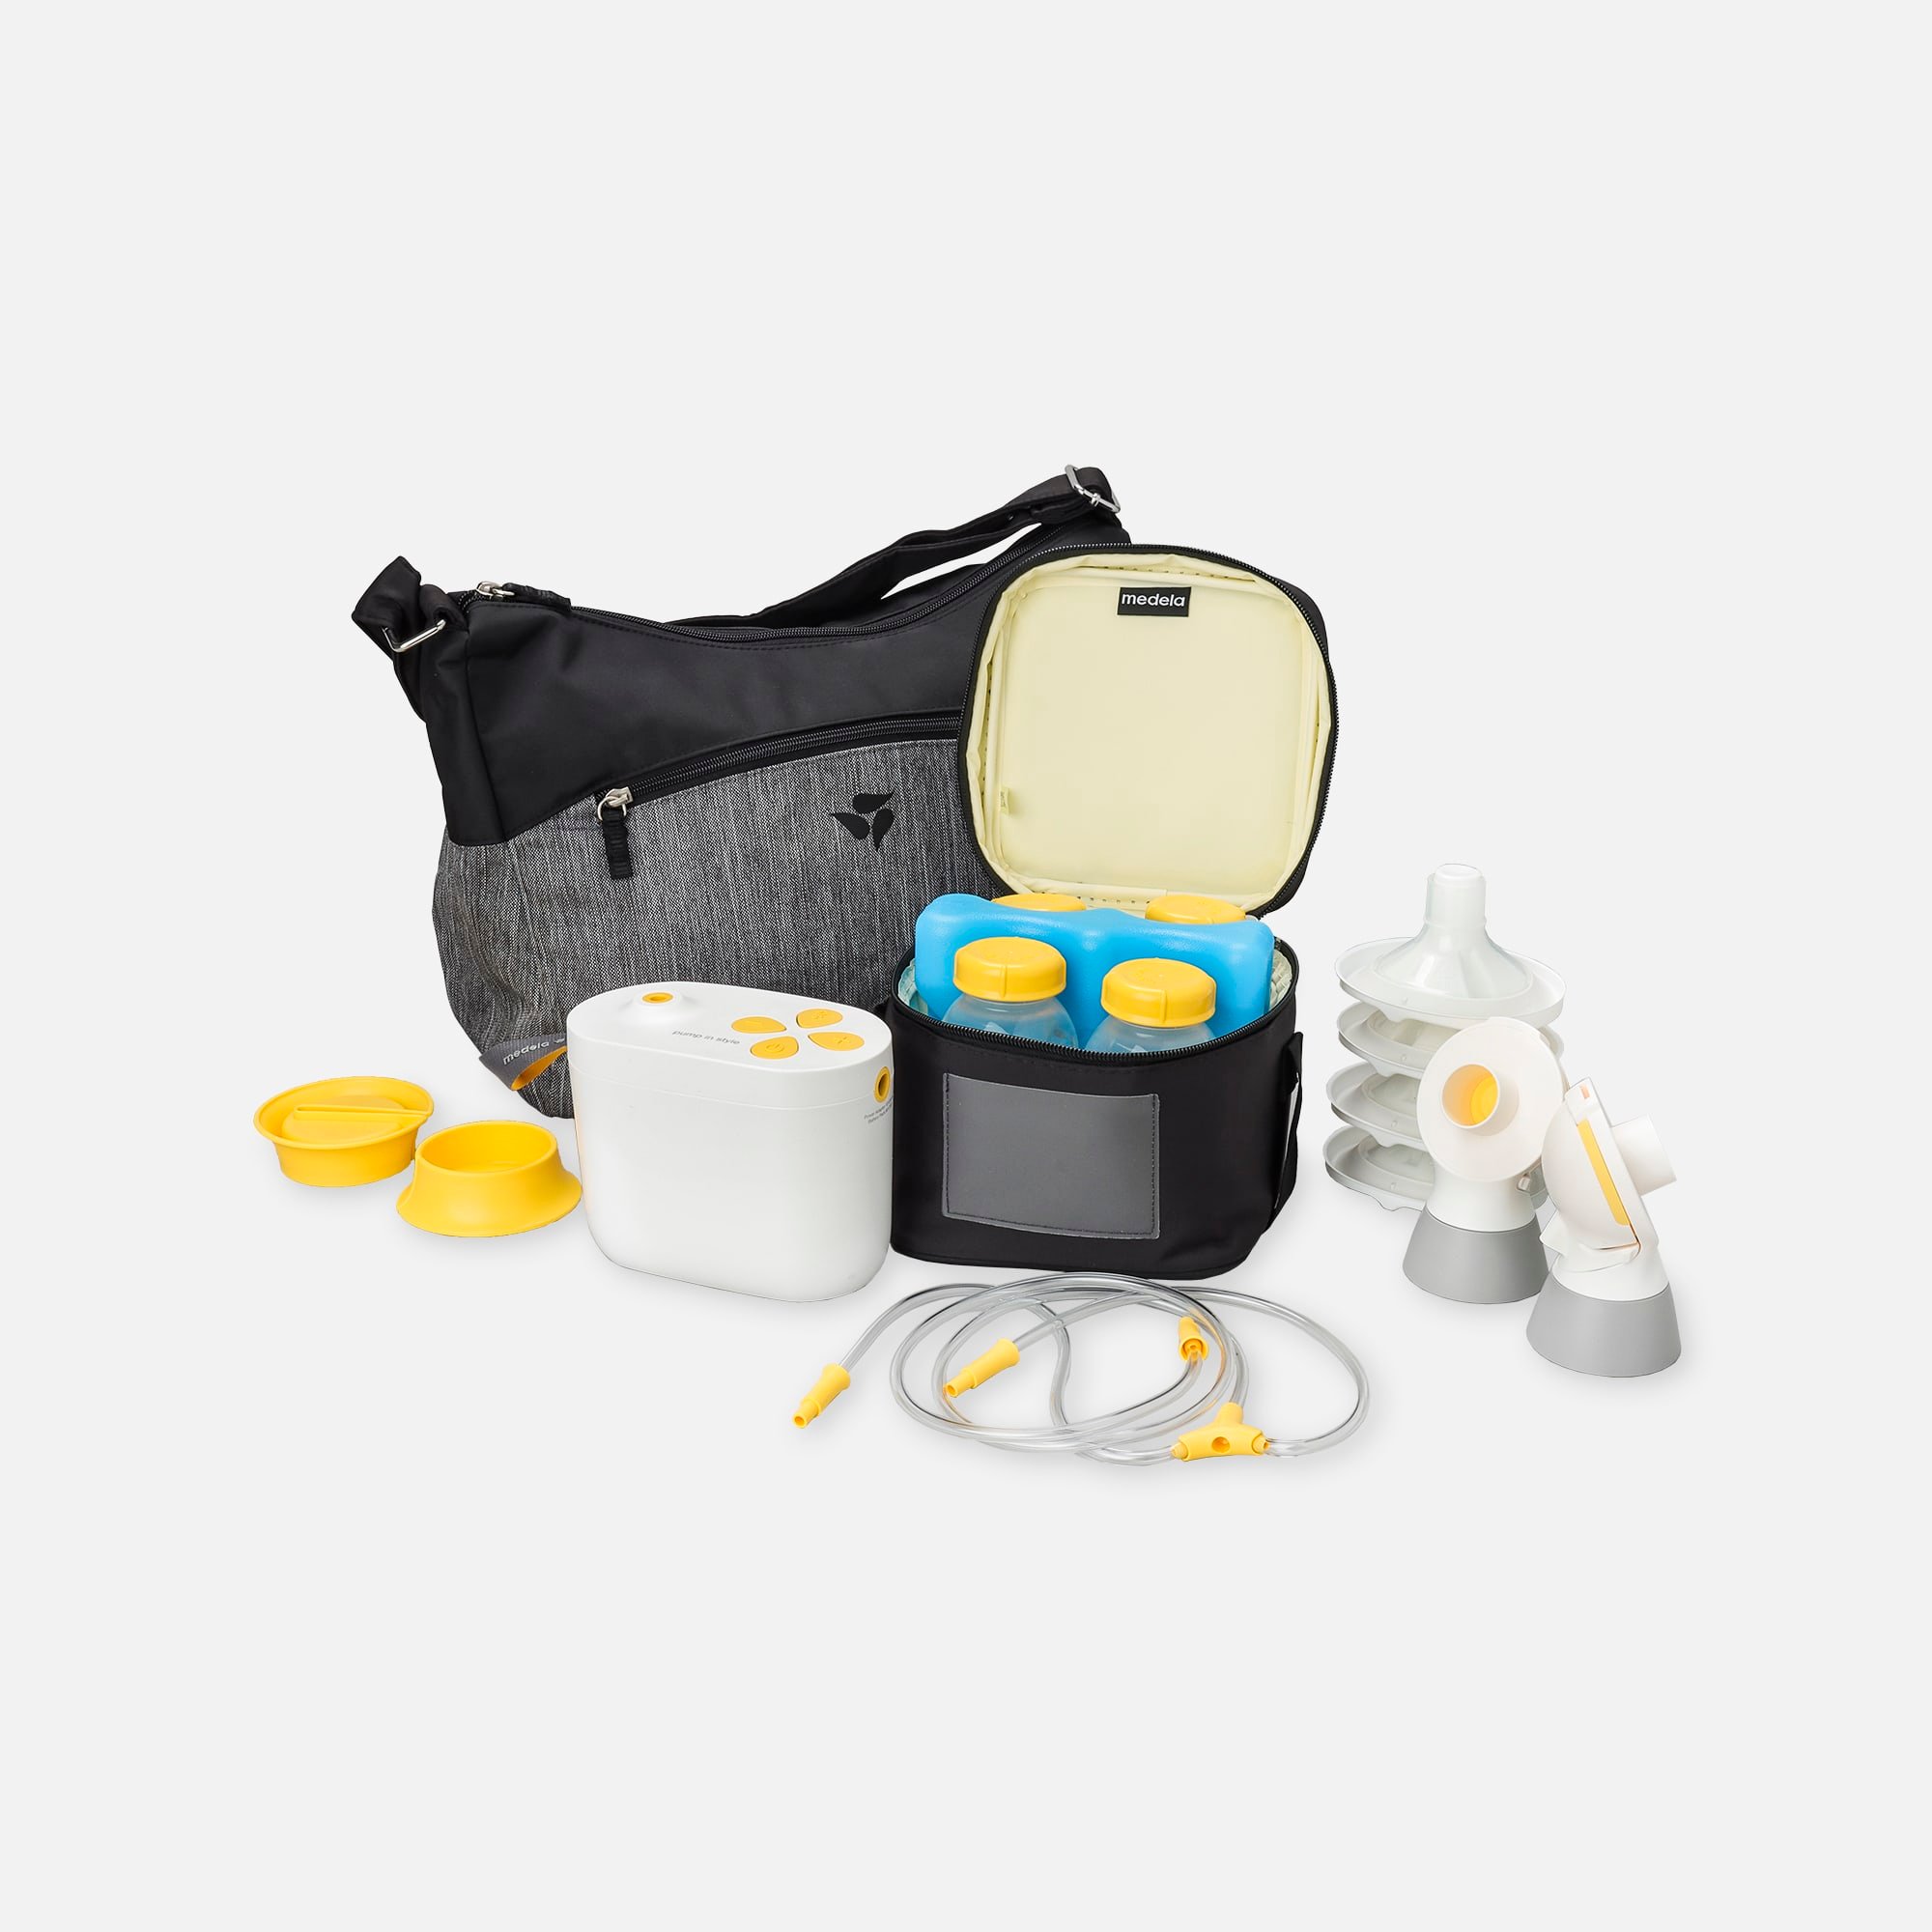 https://hsastore.com/on/demandware.static/-/Sites-hec-master/default/dw6d183305/images/large/medela-pump-in-style-double-electric-breast-pump-with-max-flow-technology-30329-02.jpg